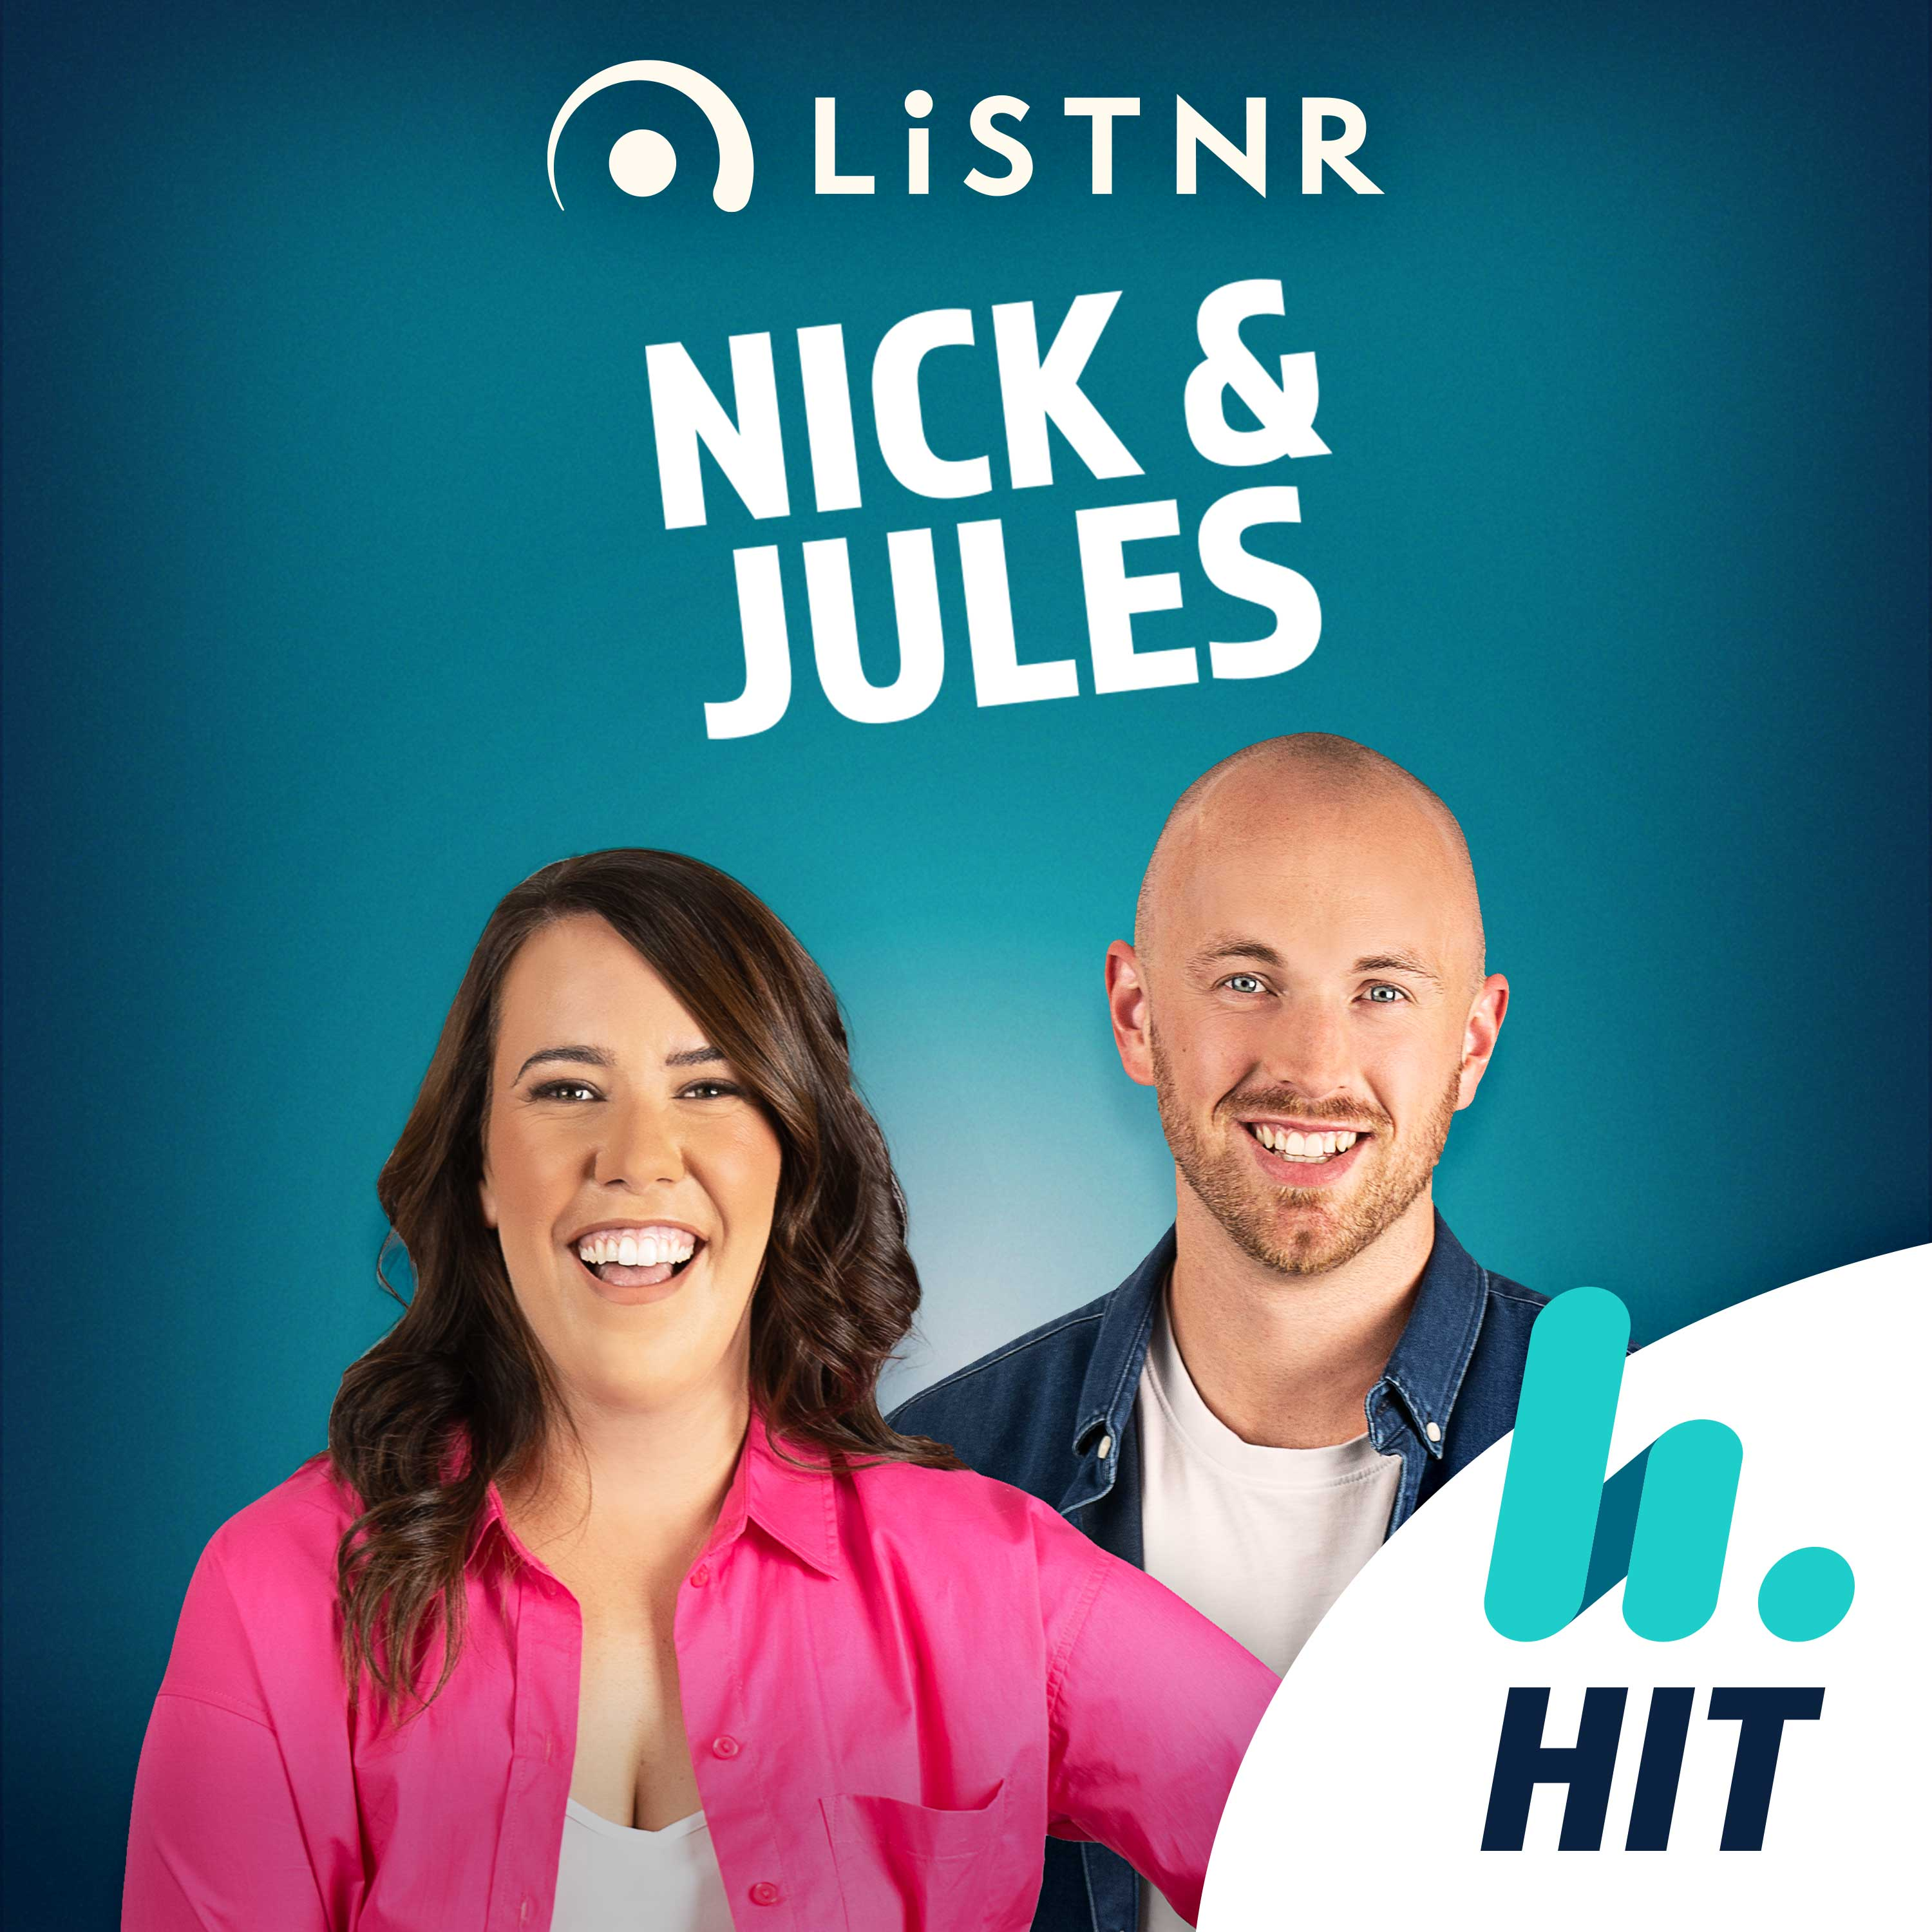 Off Air with Nick & Jules: Move Towns and Get New Friends